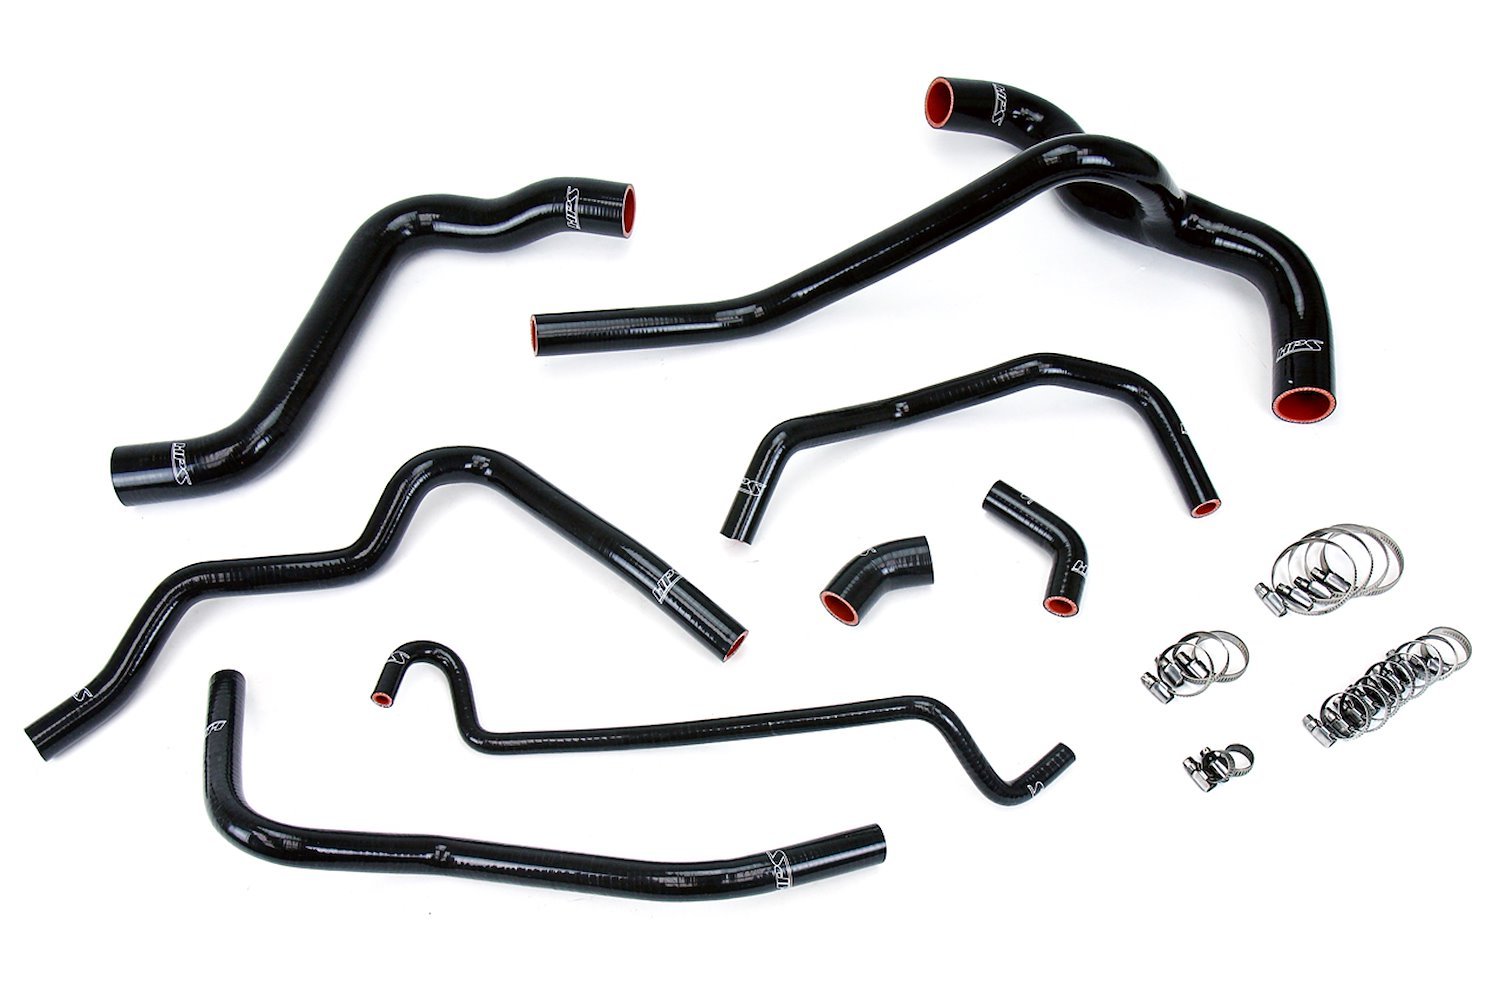 57-1400-BLK Coolant Hose Kit, High-Temp 3-Ply Reinforced Silicone, Replace Rubber Radiator Heater Coolant Hoses